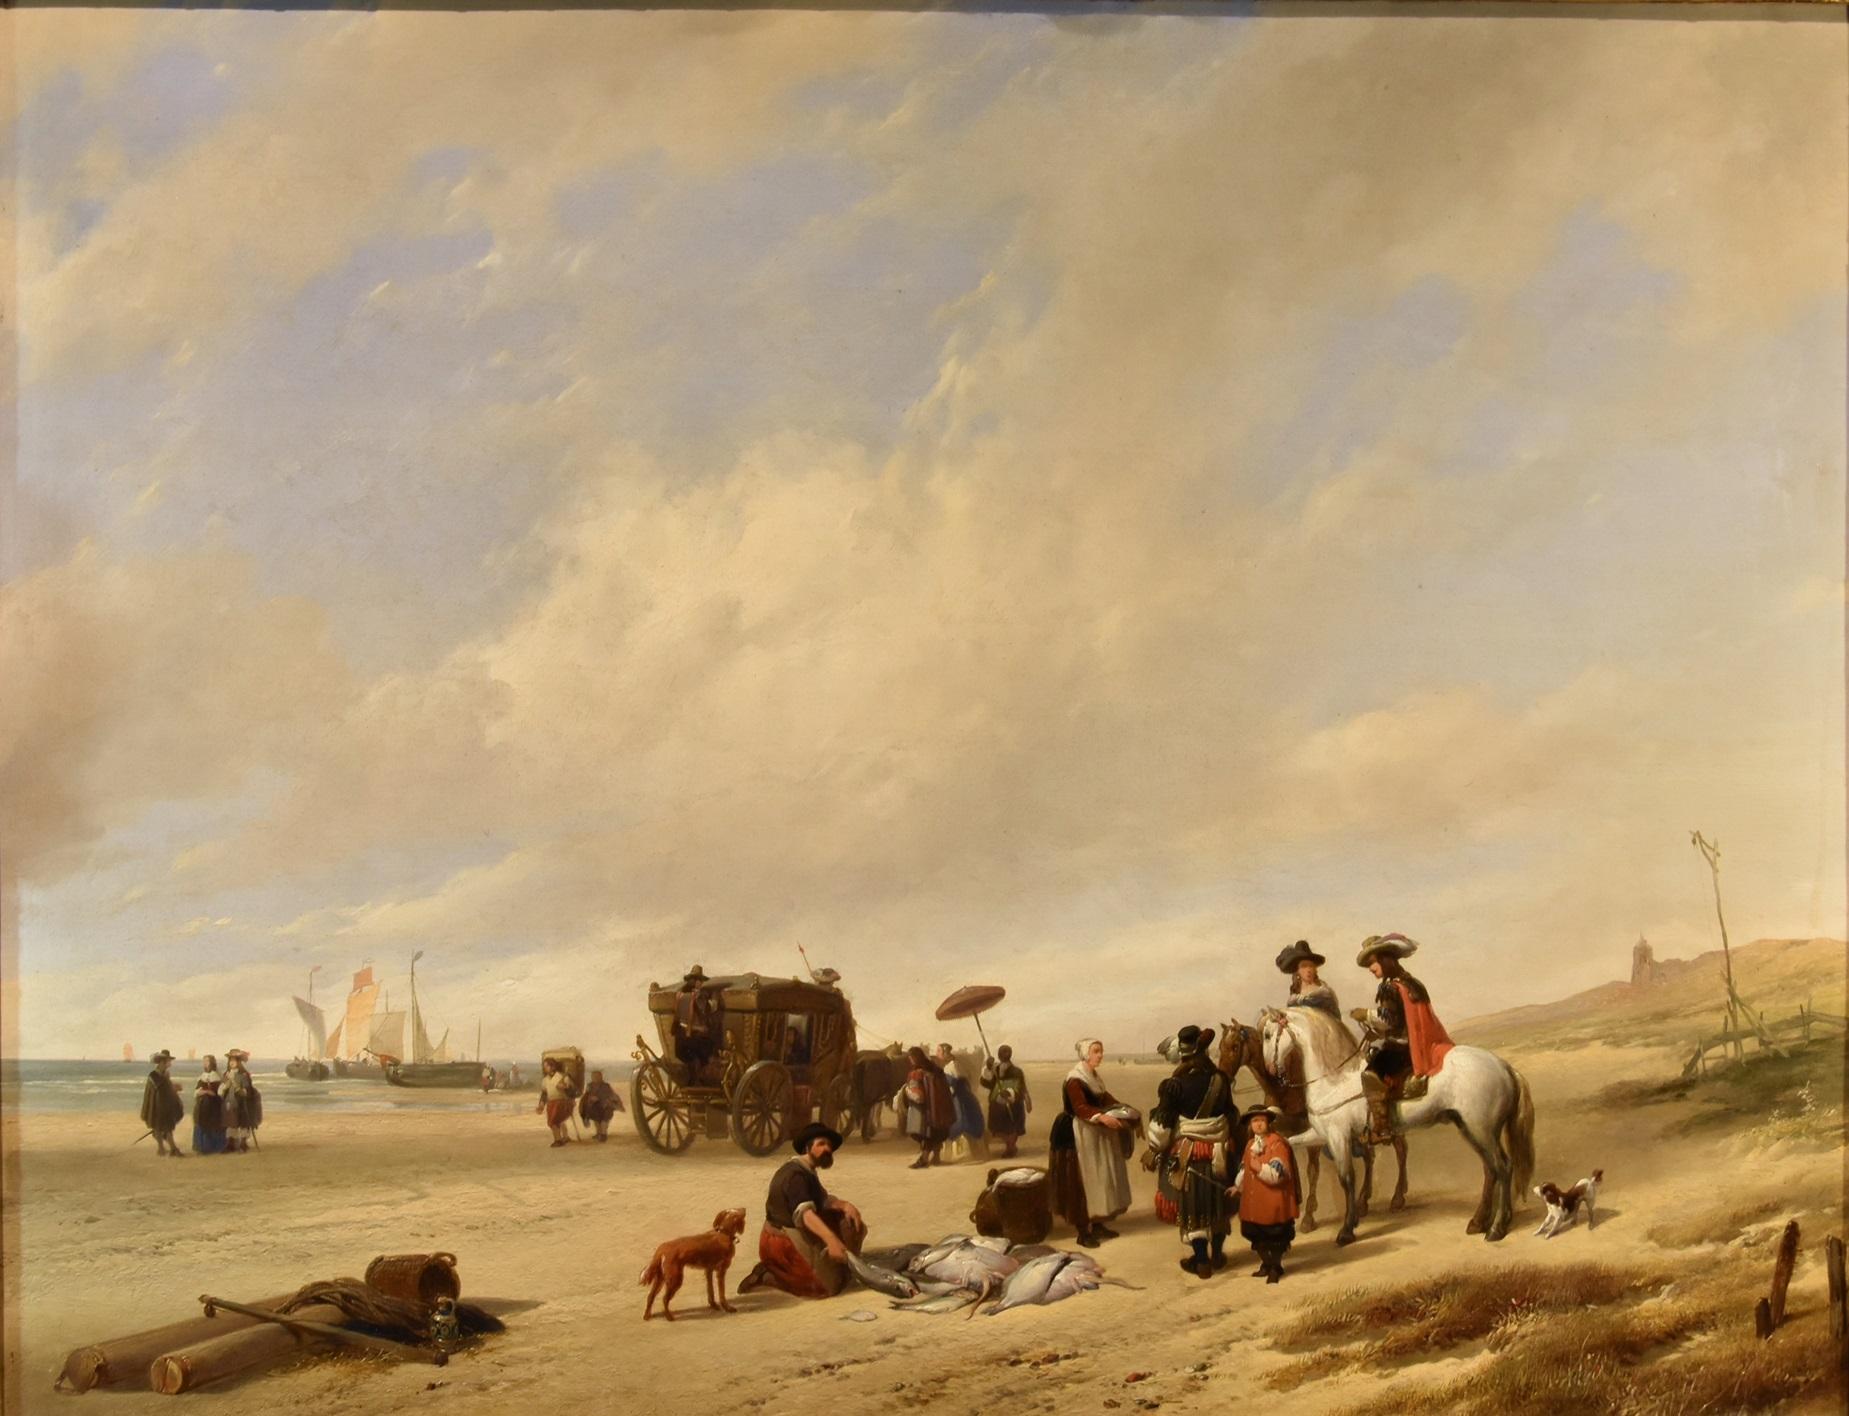 Hubertus van Hove (The Hague, 1814 - Antwerp, 1865)
- Signed H Van Hove and dated 1839 (bottom left) -

Coastal landscape with the beach of Scheveningen

Oil on panel
62 x 80 cm. - Framed 84 x 102 cm.

Provenance: Sotheby's, London, 19th Century